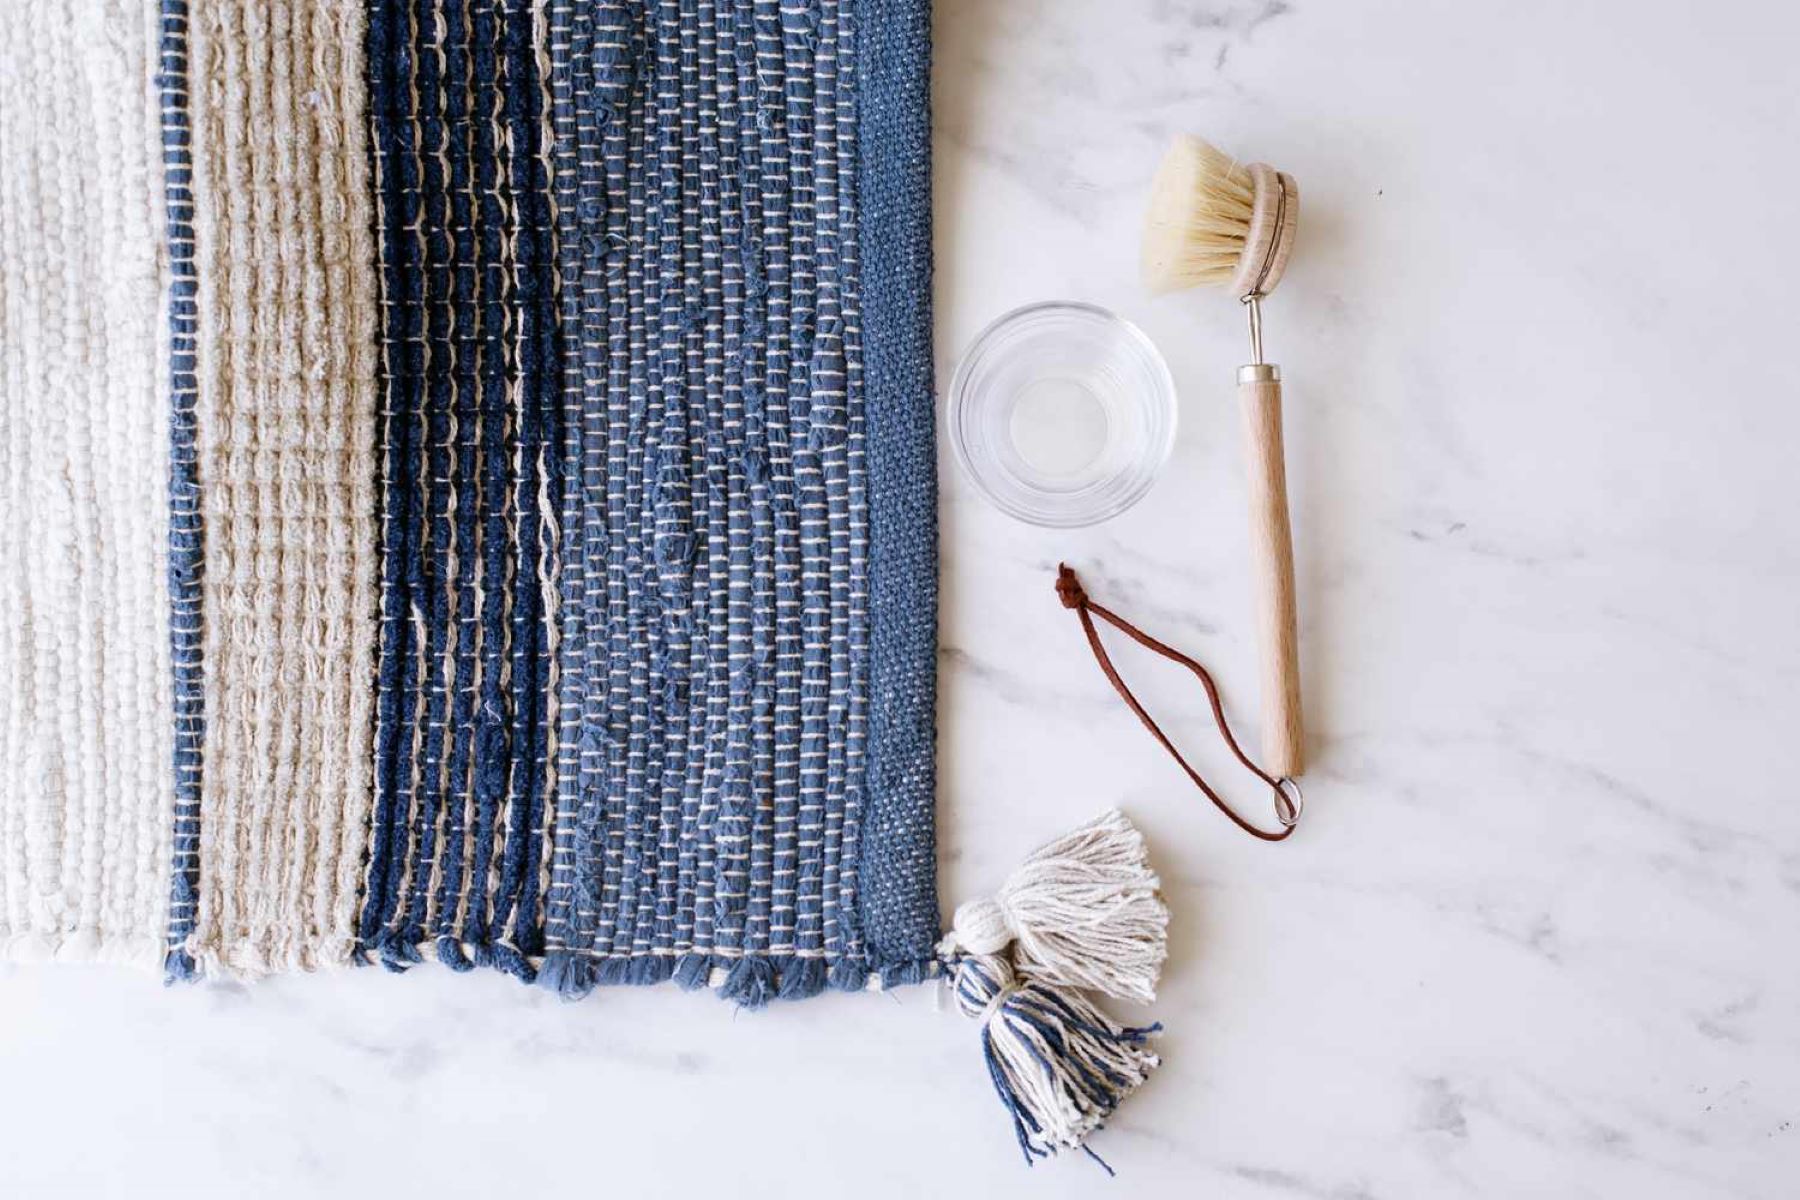 How To Clean Rag Rugs